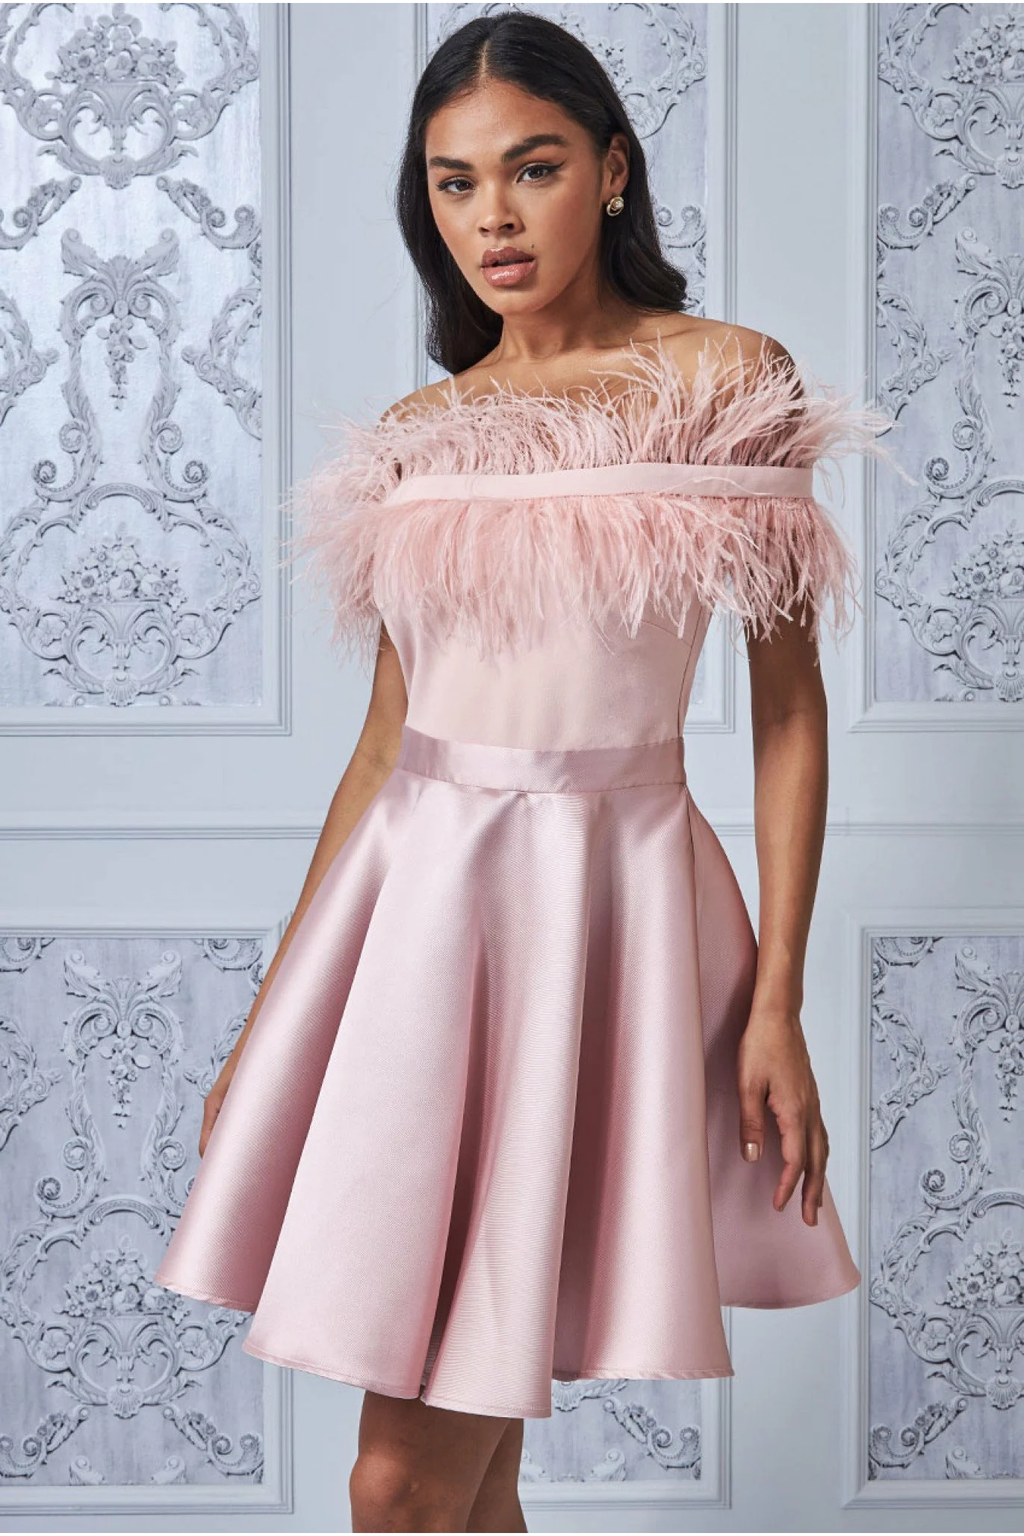 Feathered Mini Dress (Pink) Mother of Bride/Groom. Wedding Guest. Cocktail. Ball. Cruise